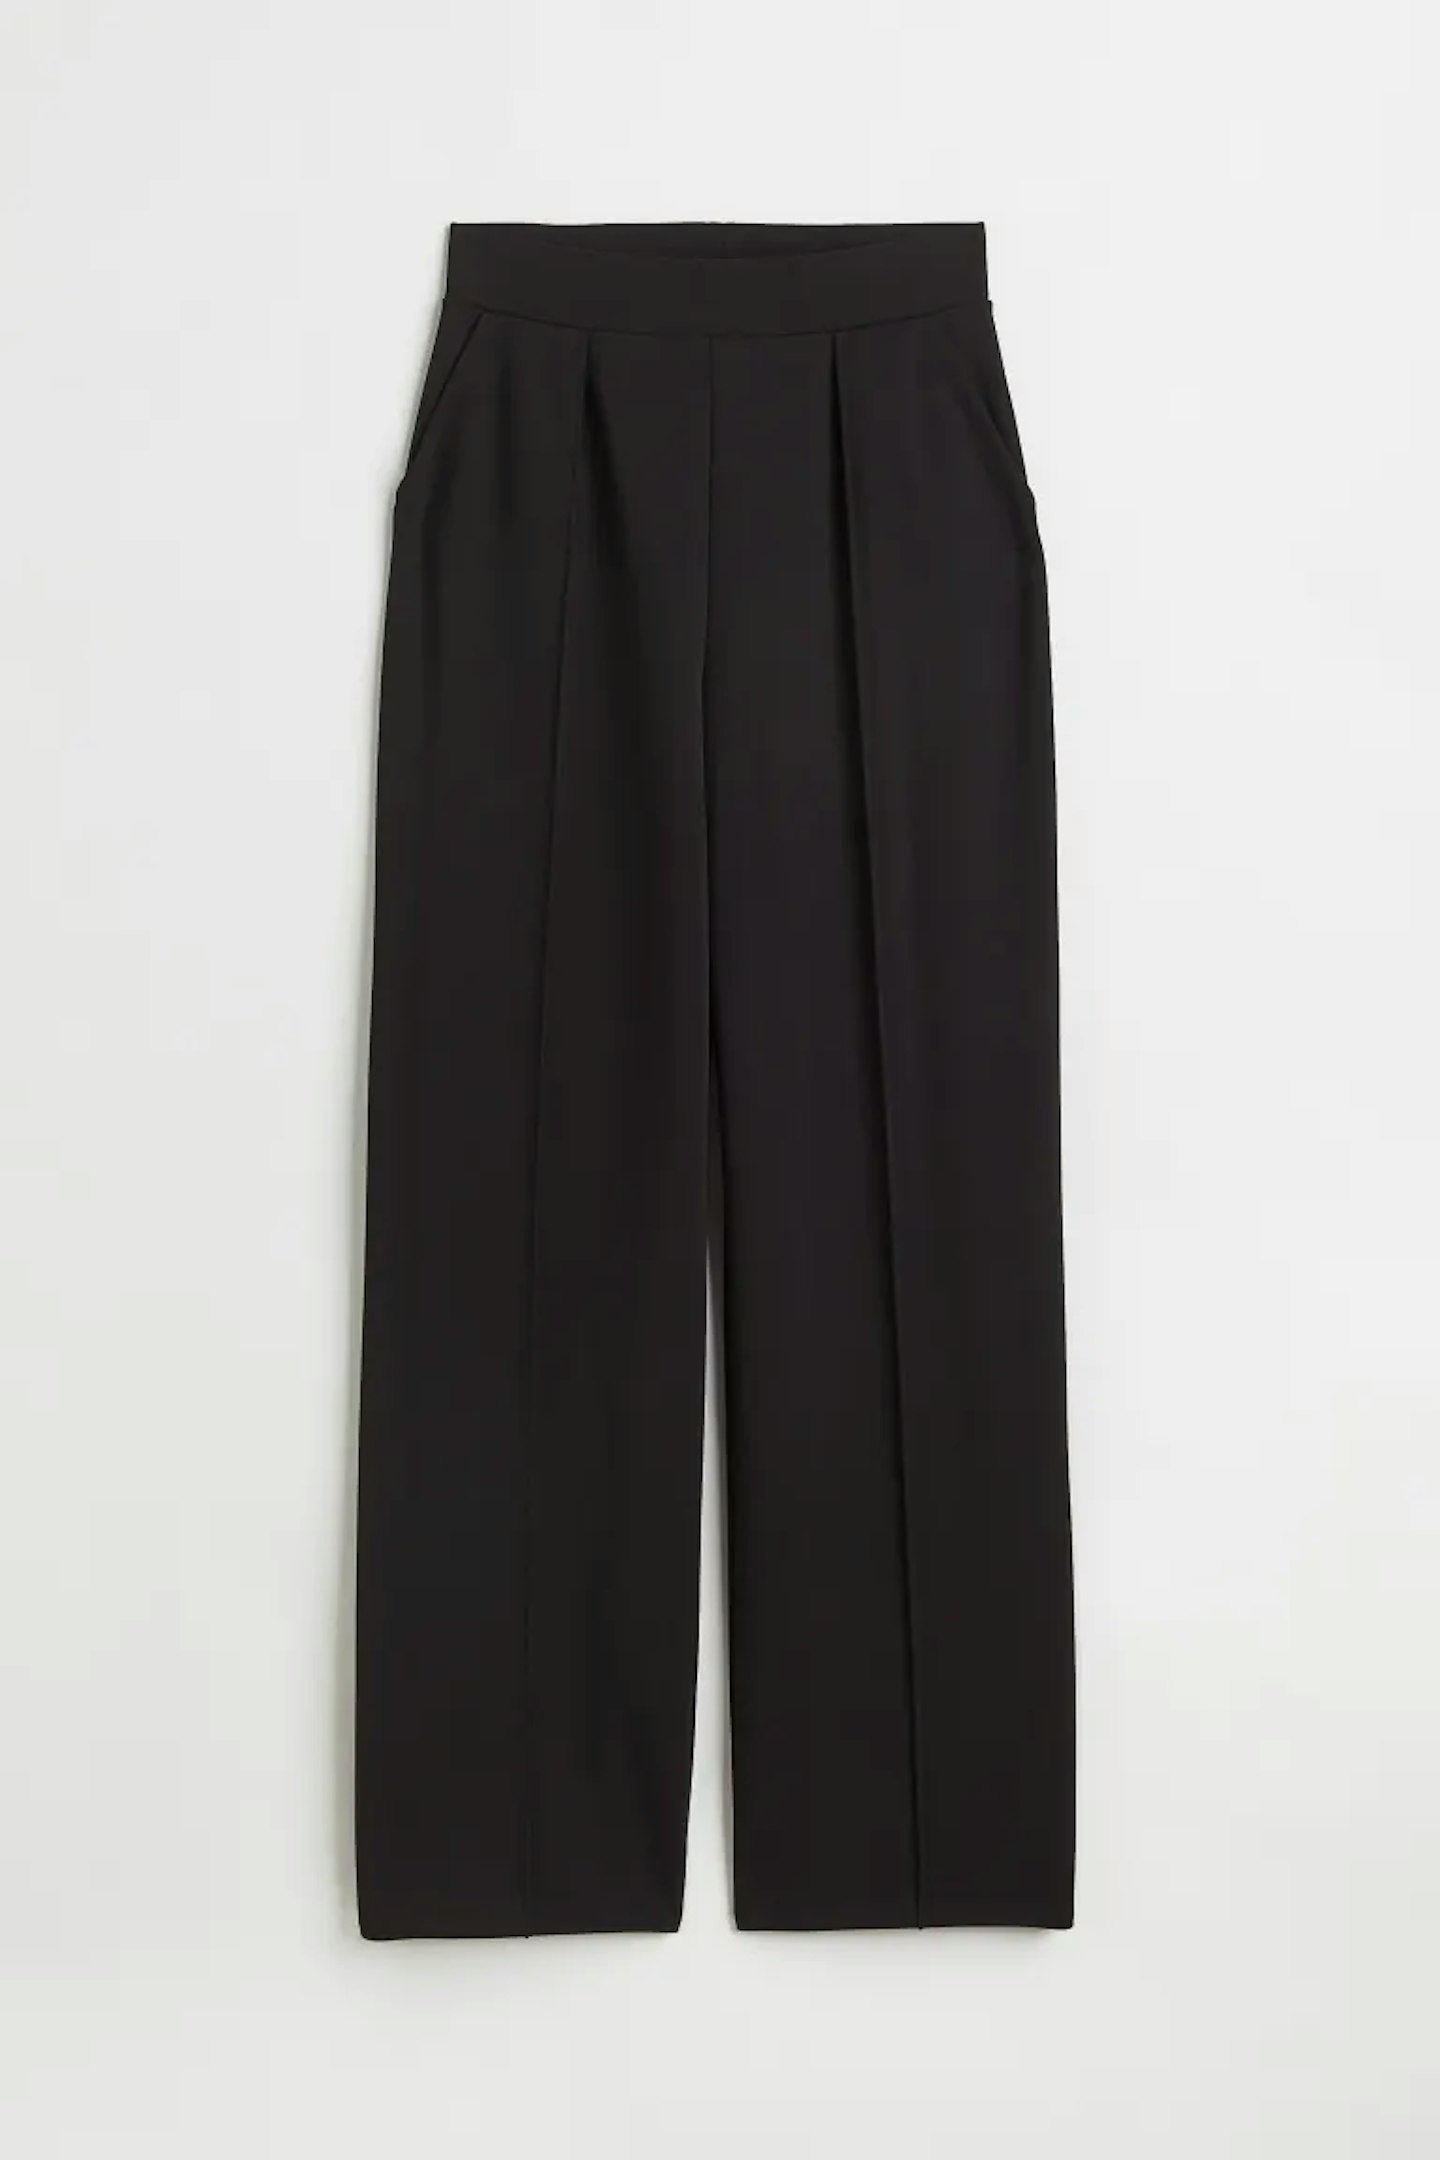 H&M, High Waisted Tailored Trousers